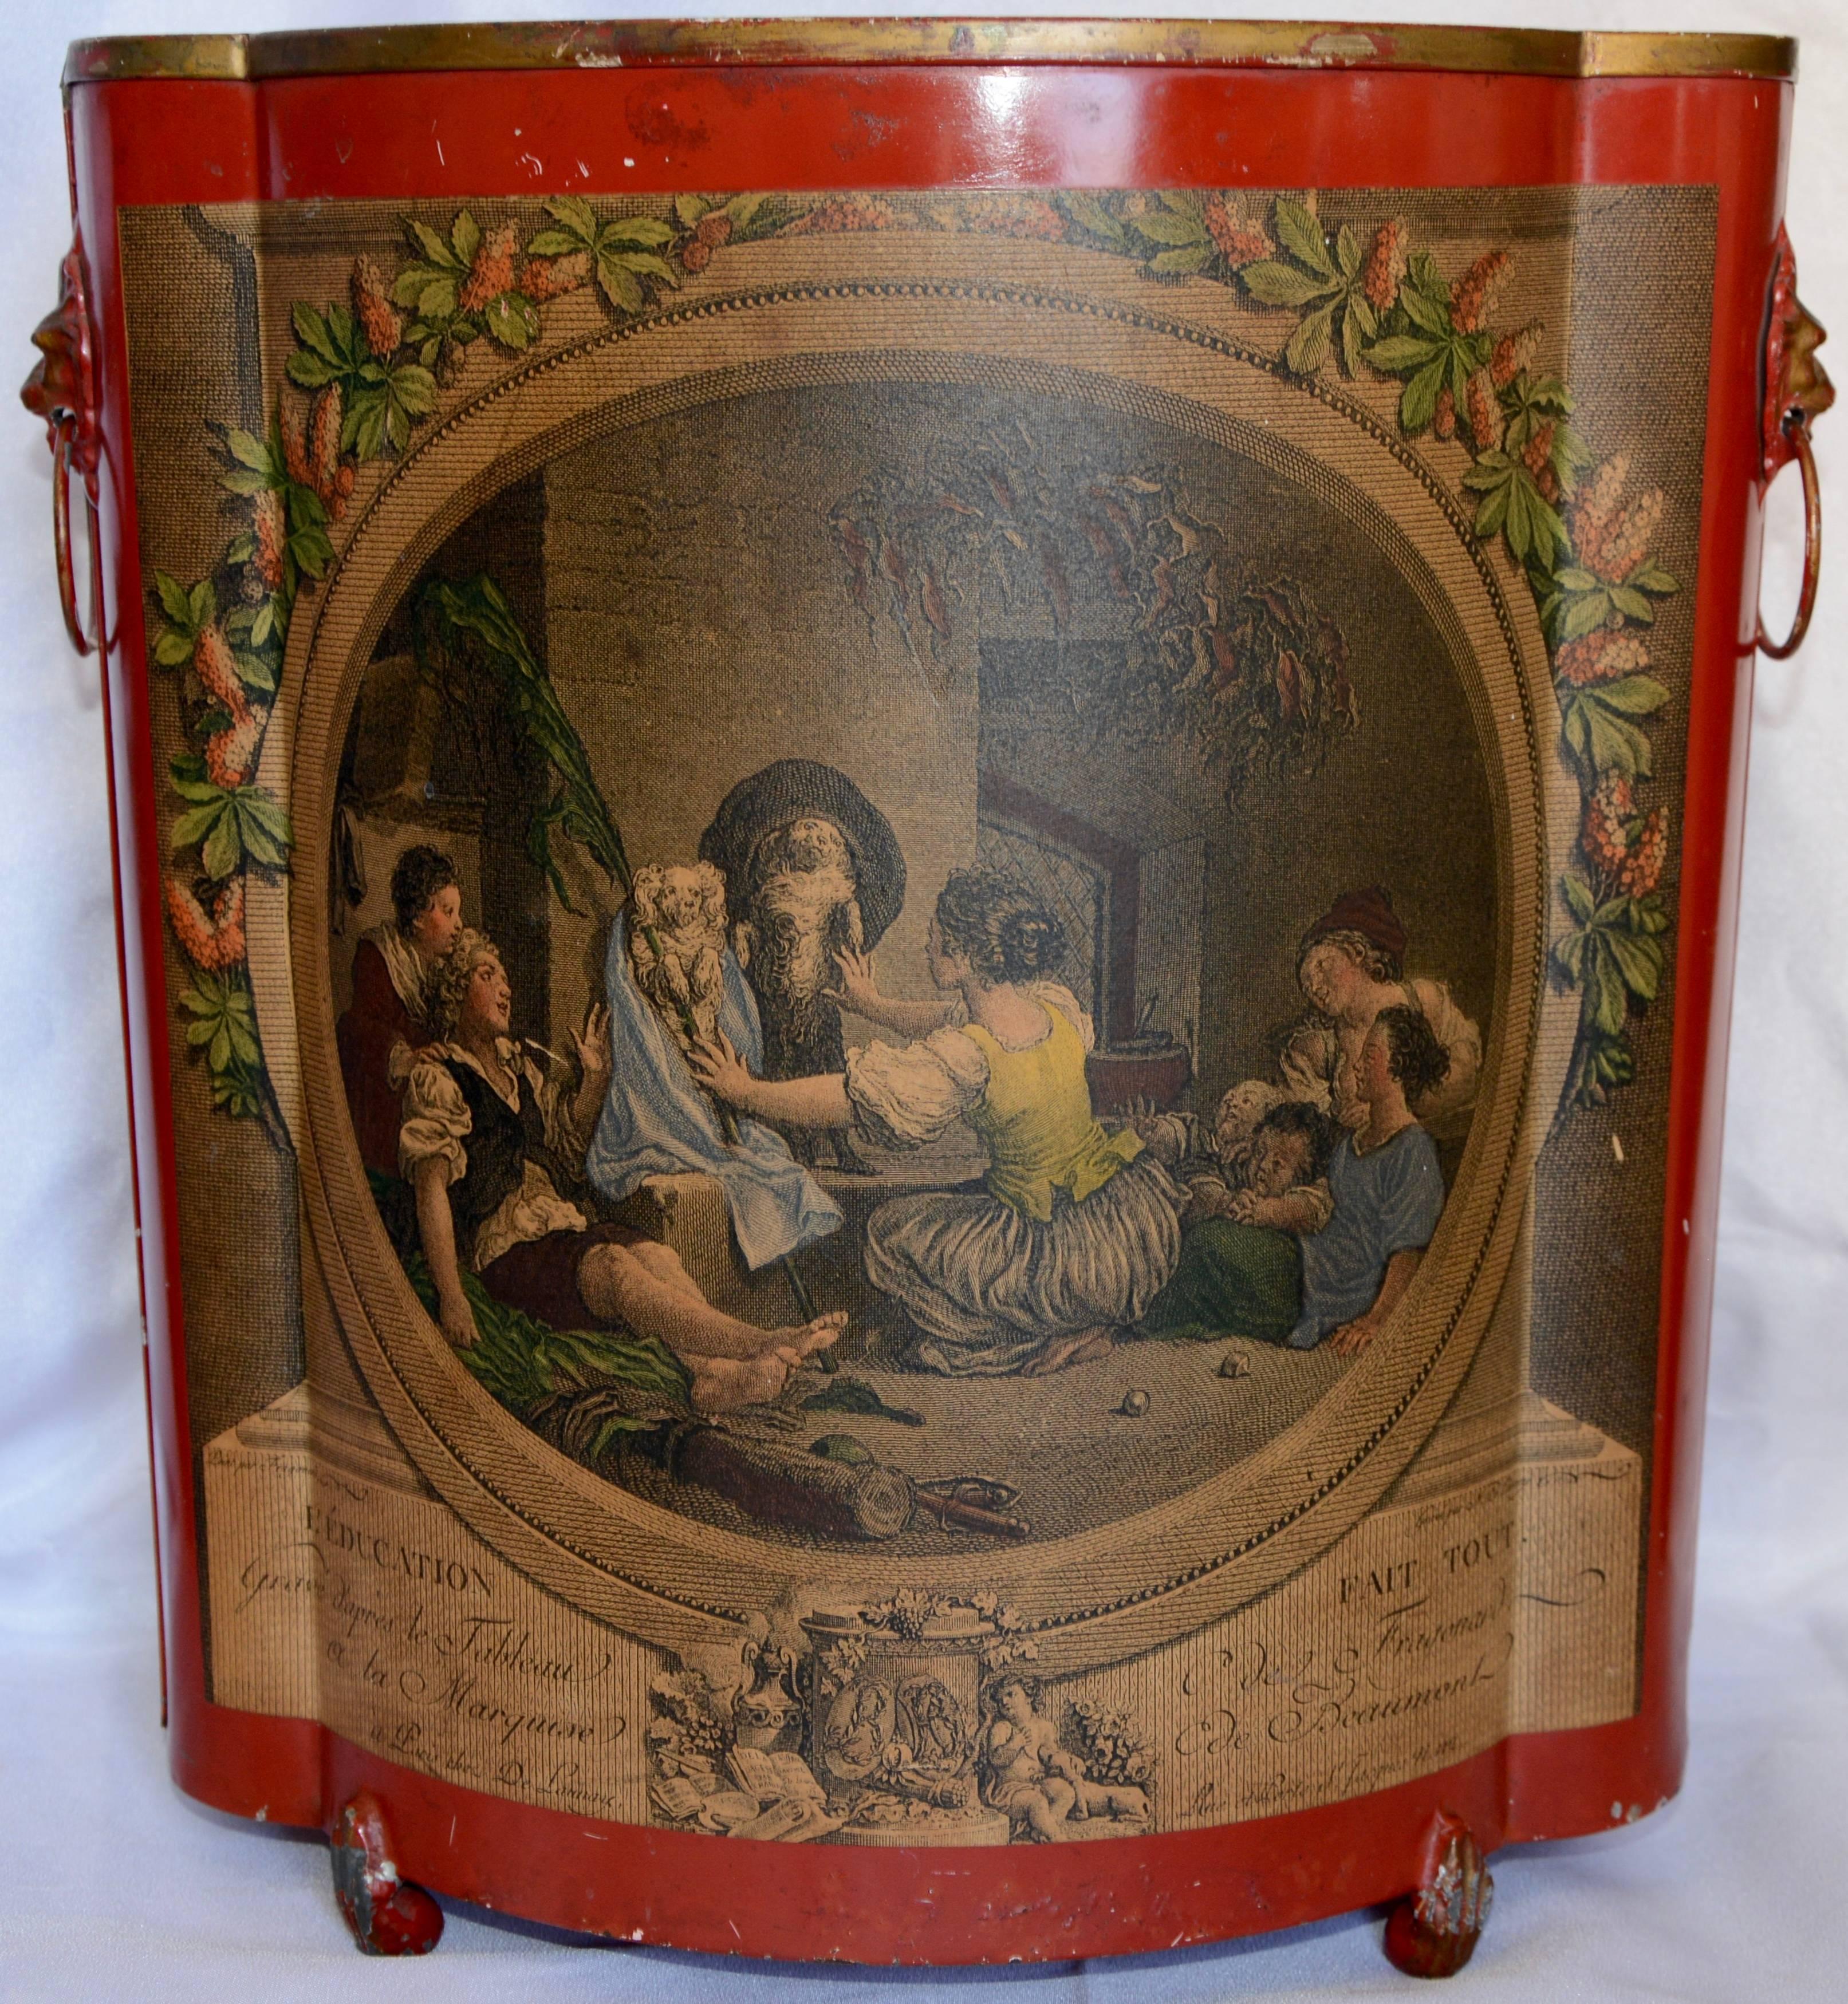 A vibrant red adorns this midcentury tin waste basket. It is embellished with a decoupage print depicting what appears to be a family with their dogs. The scene is edged with a floral border. The pair of handles are of lions heads with the loops in